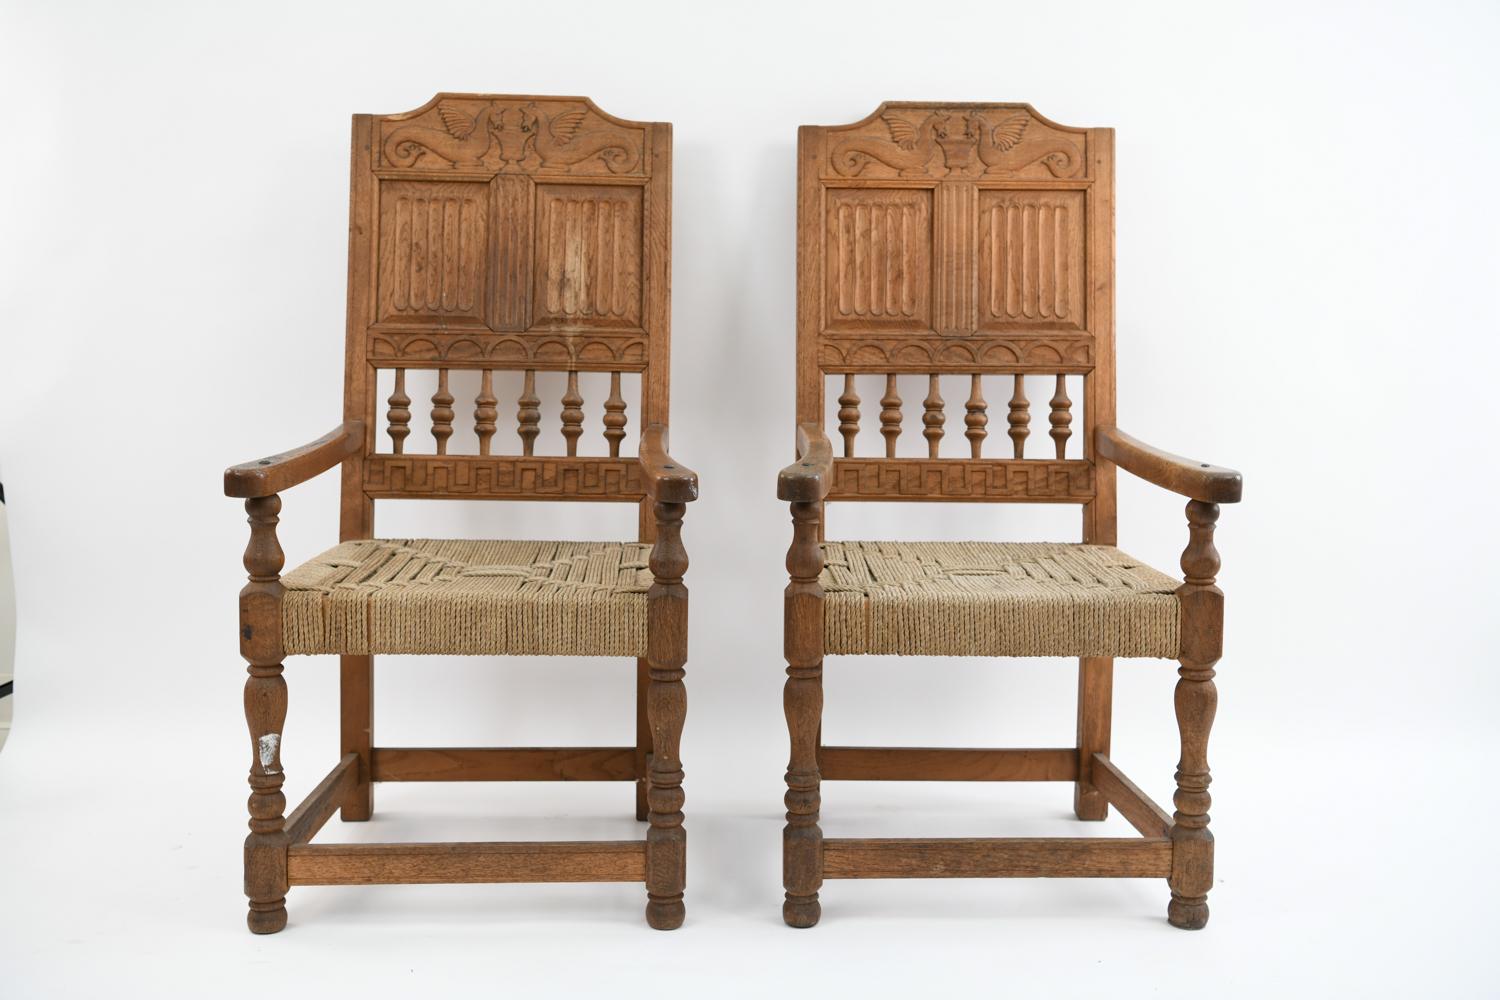 More impressive in person these Danish baroque carved oak armchairs feature a lovely pair of water horses on each top rail. Featuring rope seating, hand forged nails on each armrest and an admirable patina overall these chairs can be featured in a